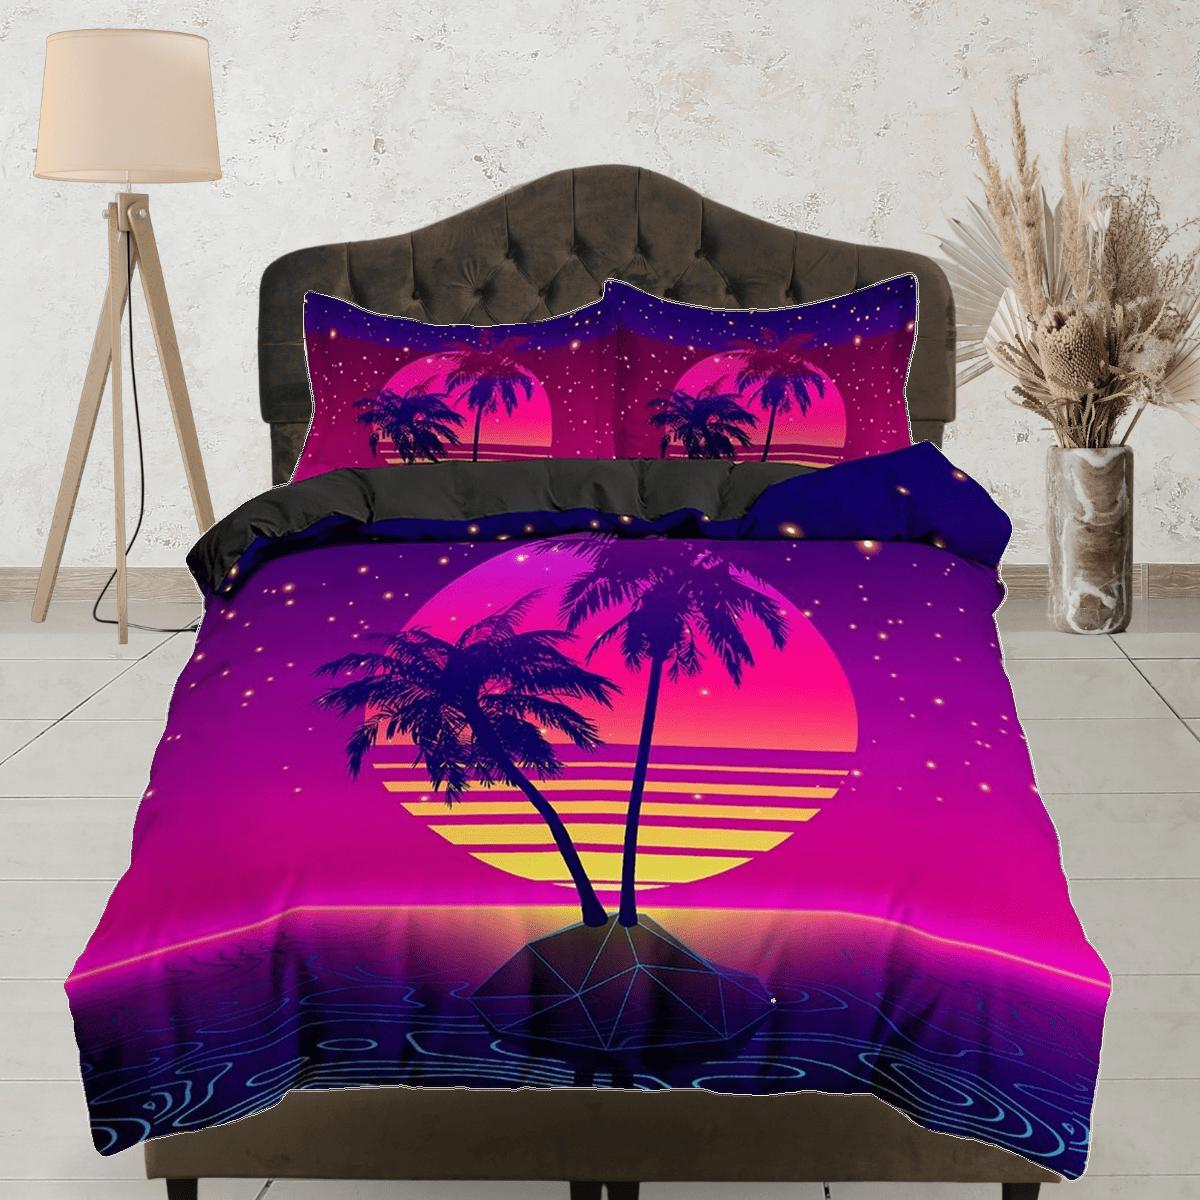 daintyduvet Vaporwave Sunset in Tropical Beach Bedding, Cool Hippie Pink Purple Duvet Cover Set, Trippy Psychedelic Bed Cover 90s Nostalgia Unisex